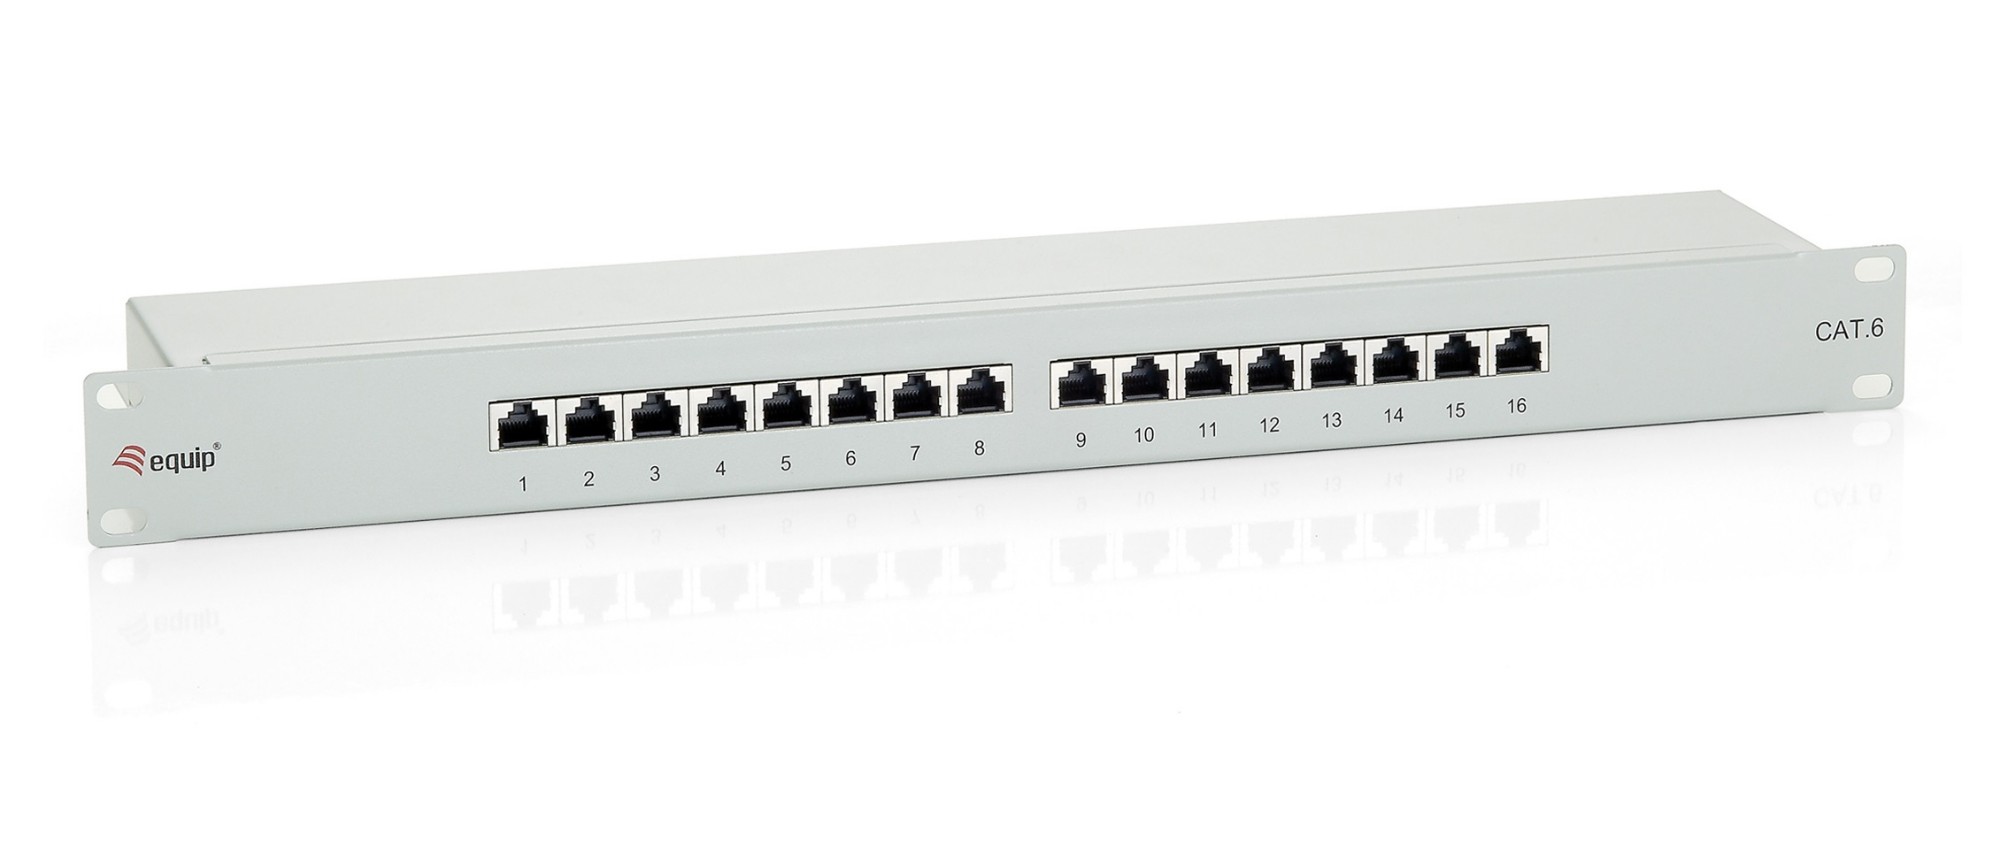 Photos - Other network equipment Equip 16-Port Cat.6 Shielded Patch Panel, Light Grey 326316 